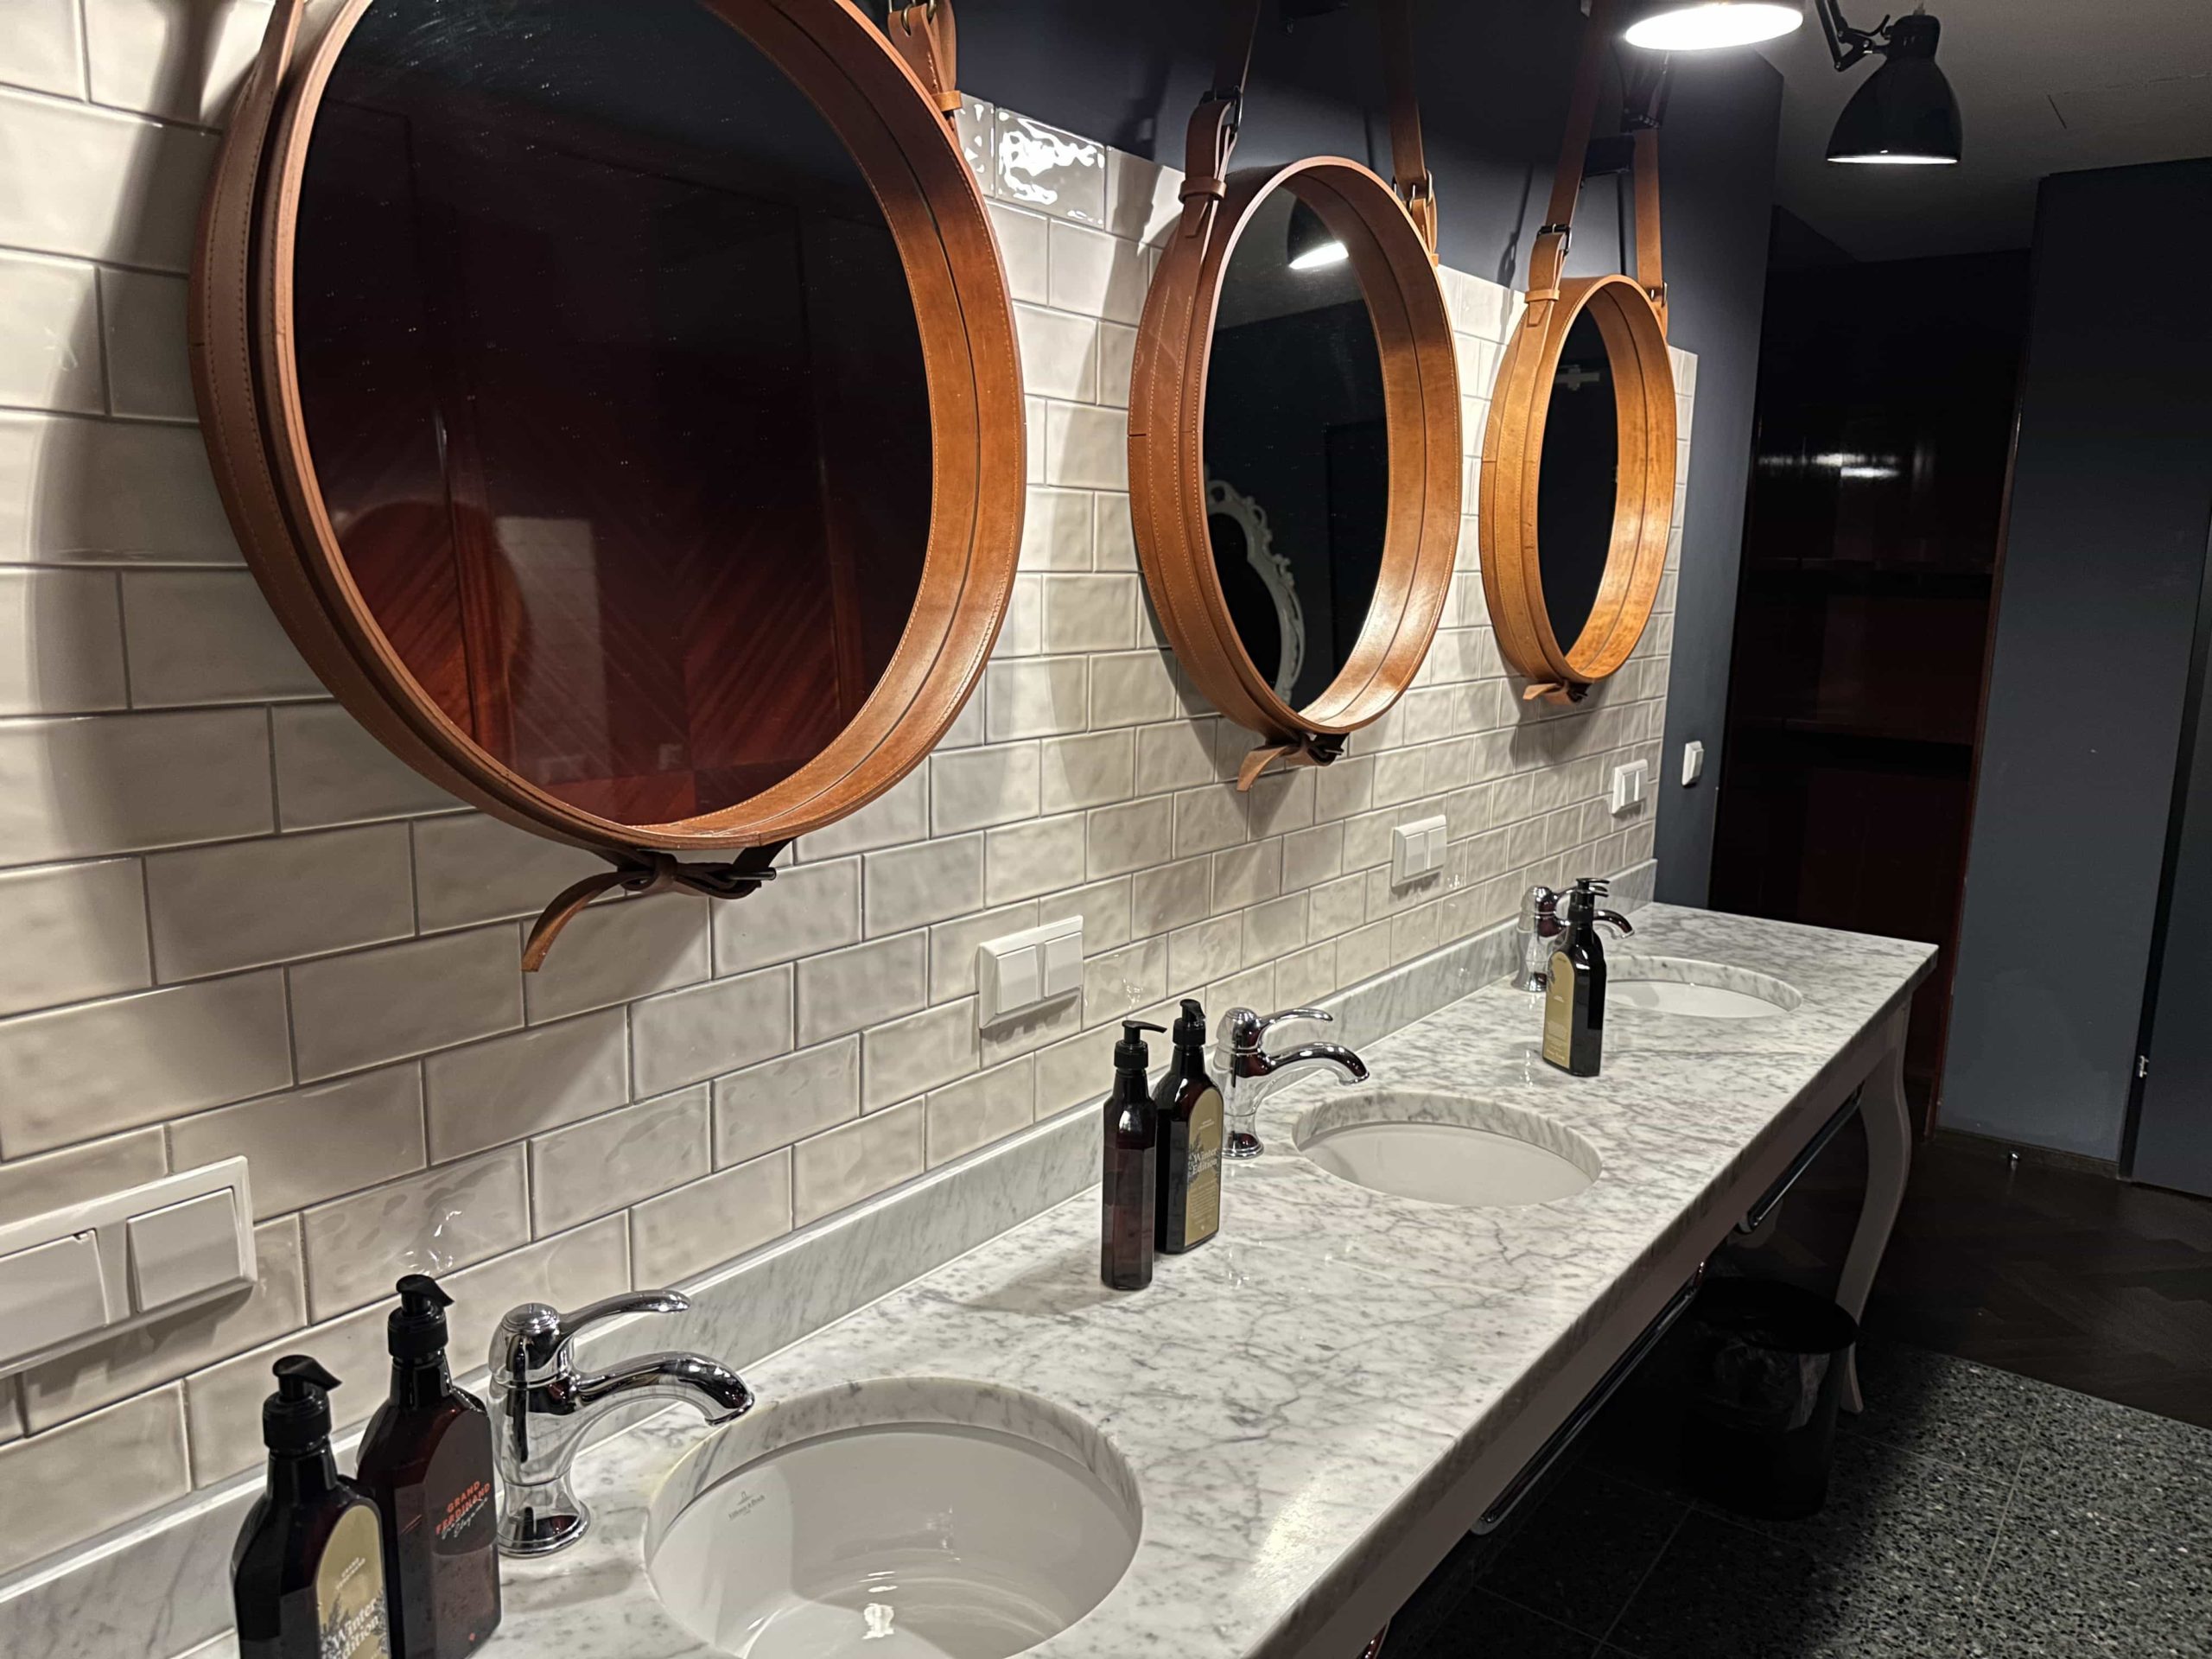 Three communal sinks, each with soaps, mirrors, and trash bins